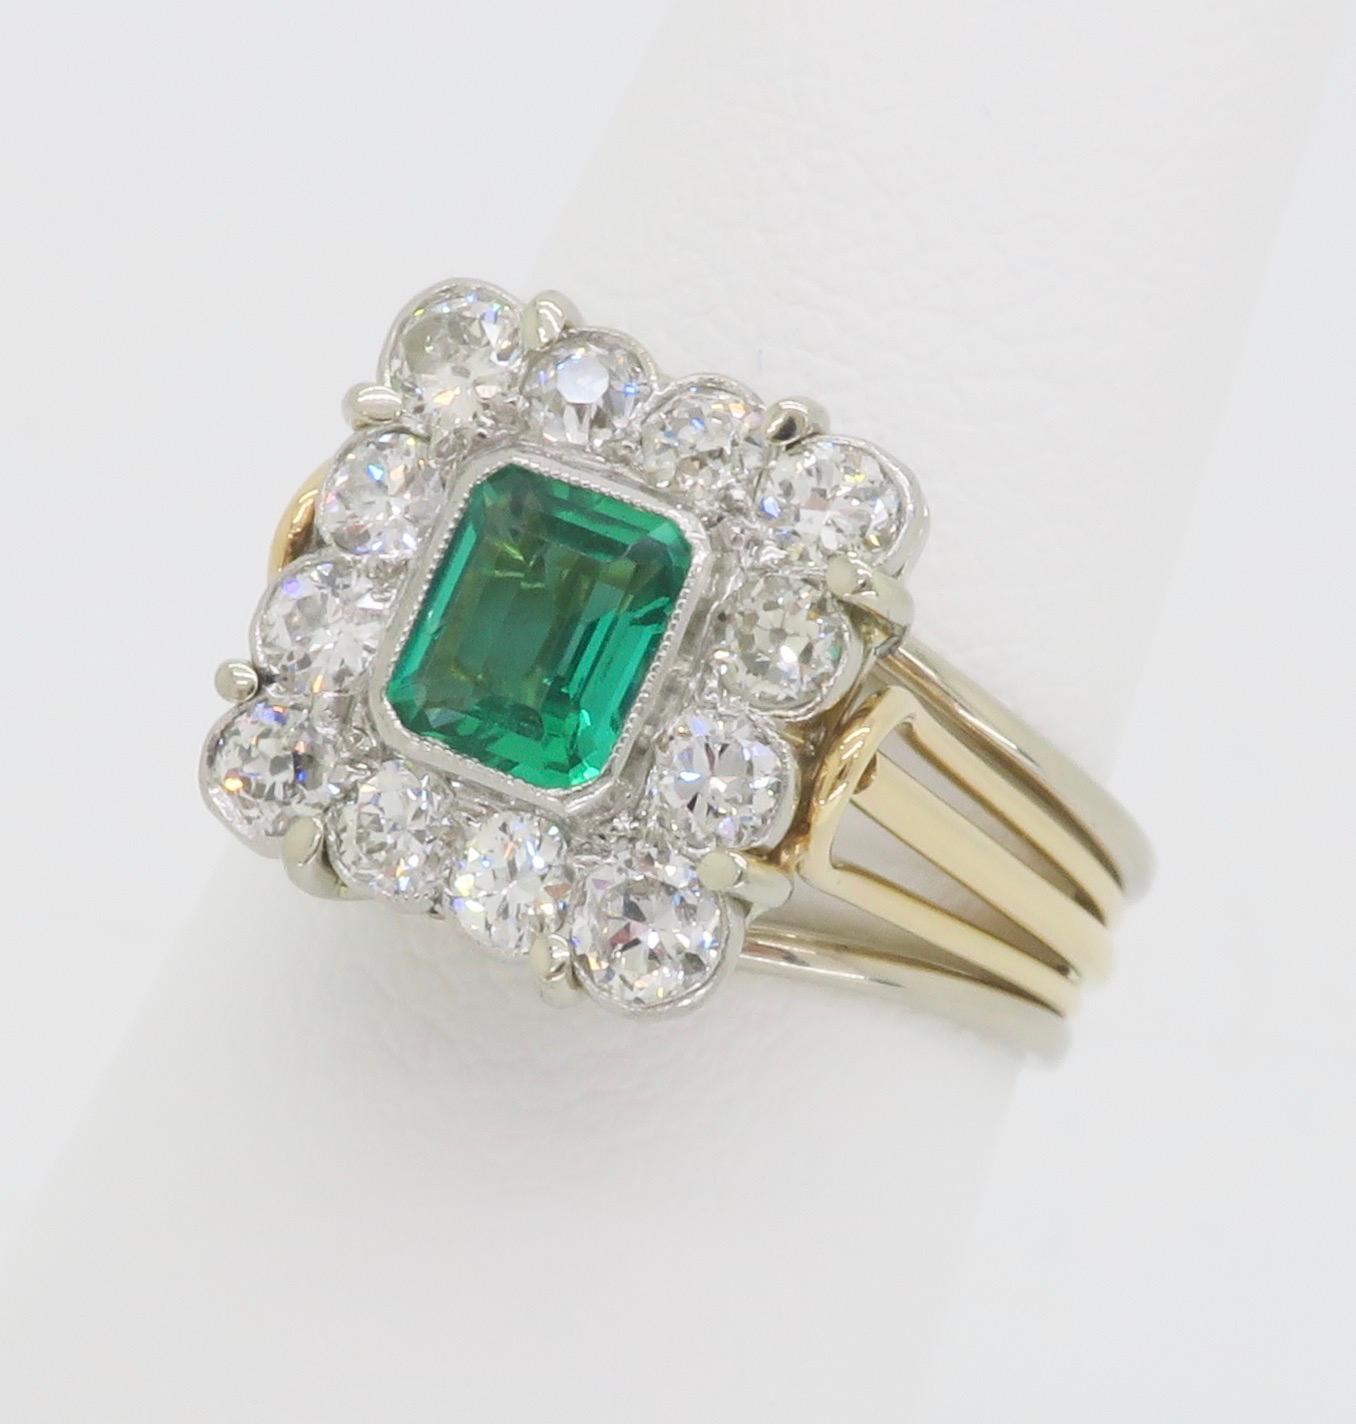 Vintage Emerald & Diamond Ring Crafted in Platinum & 18k Gold  In Excellent Condition For Sale In Webster, NY